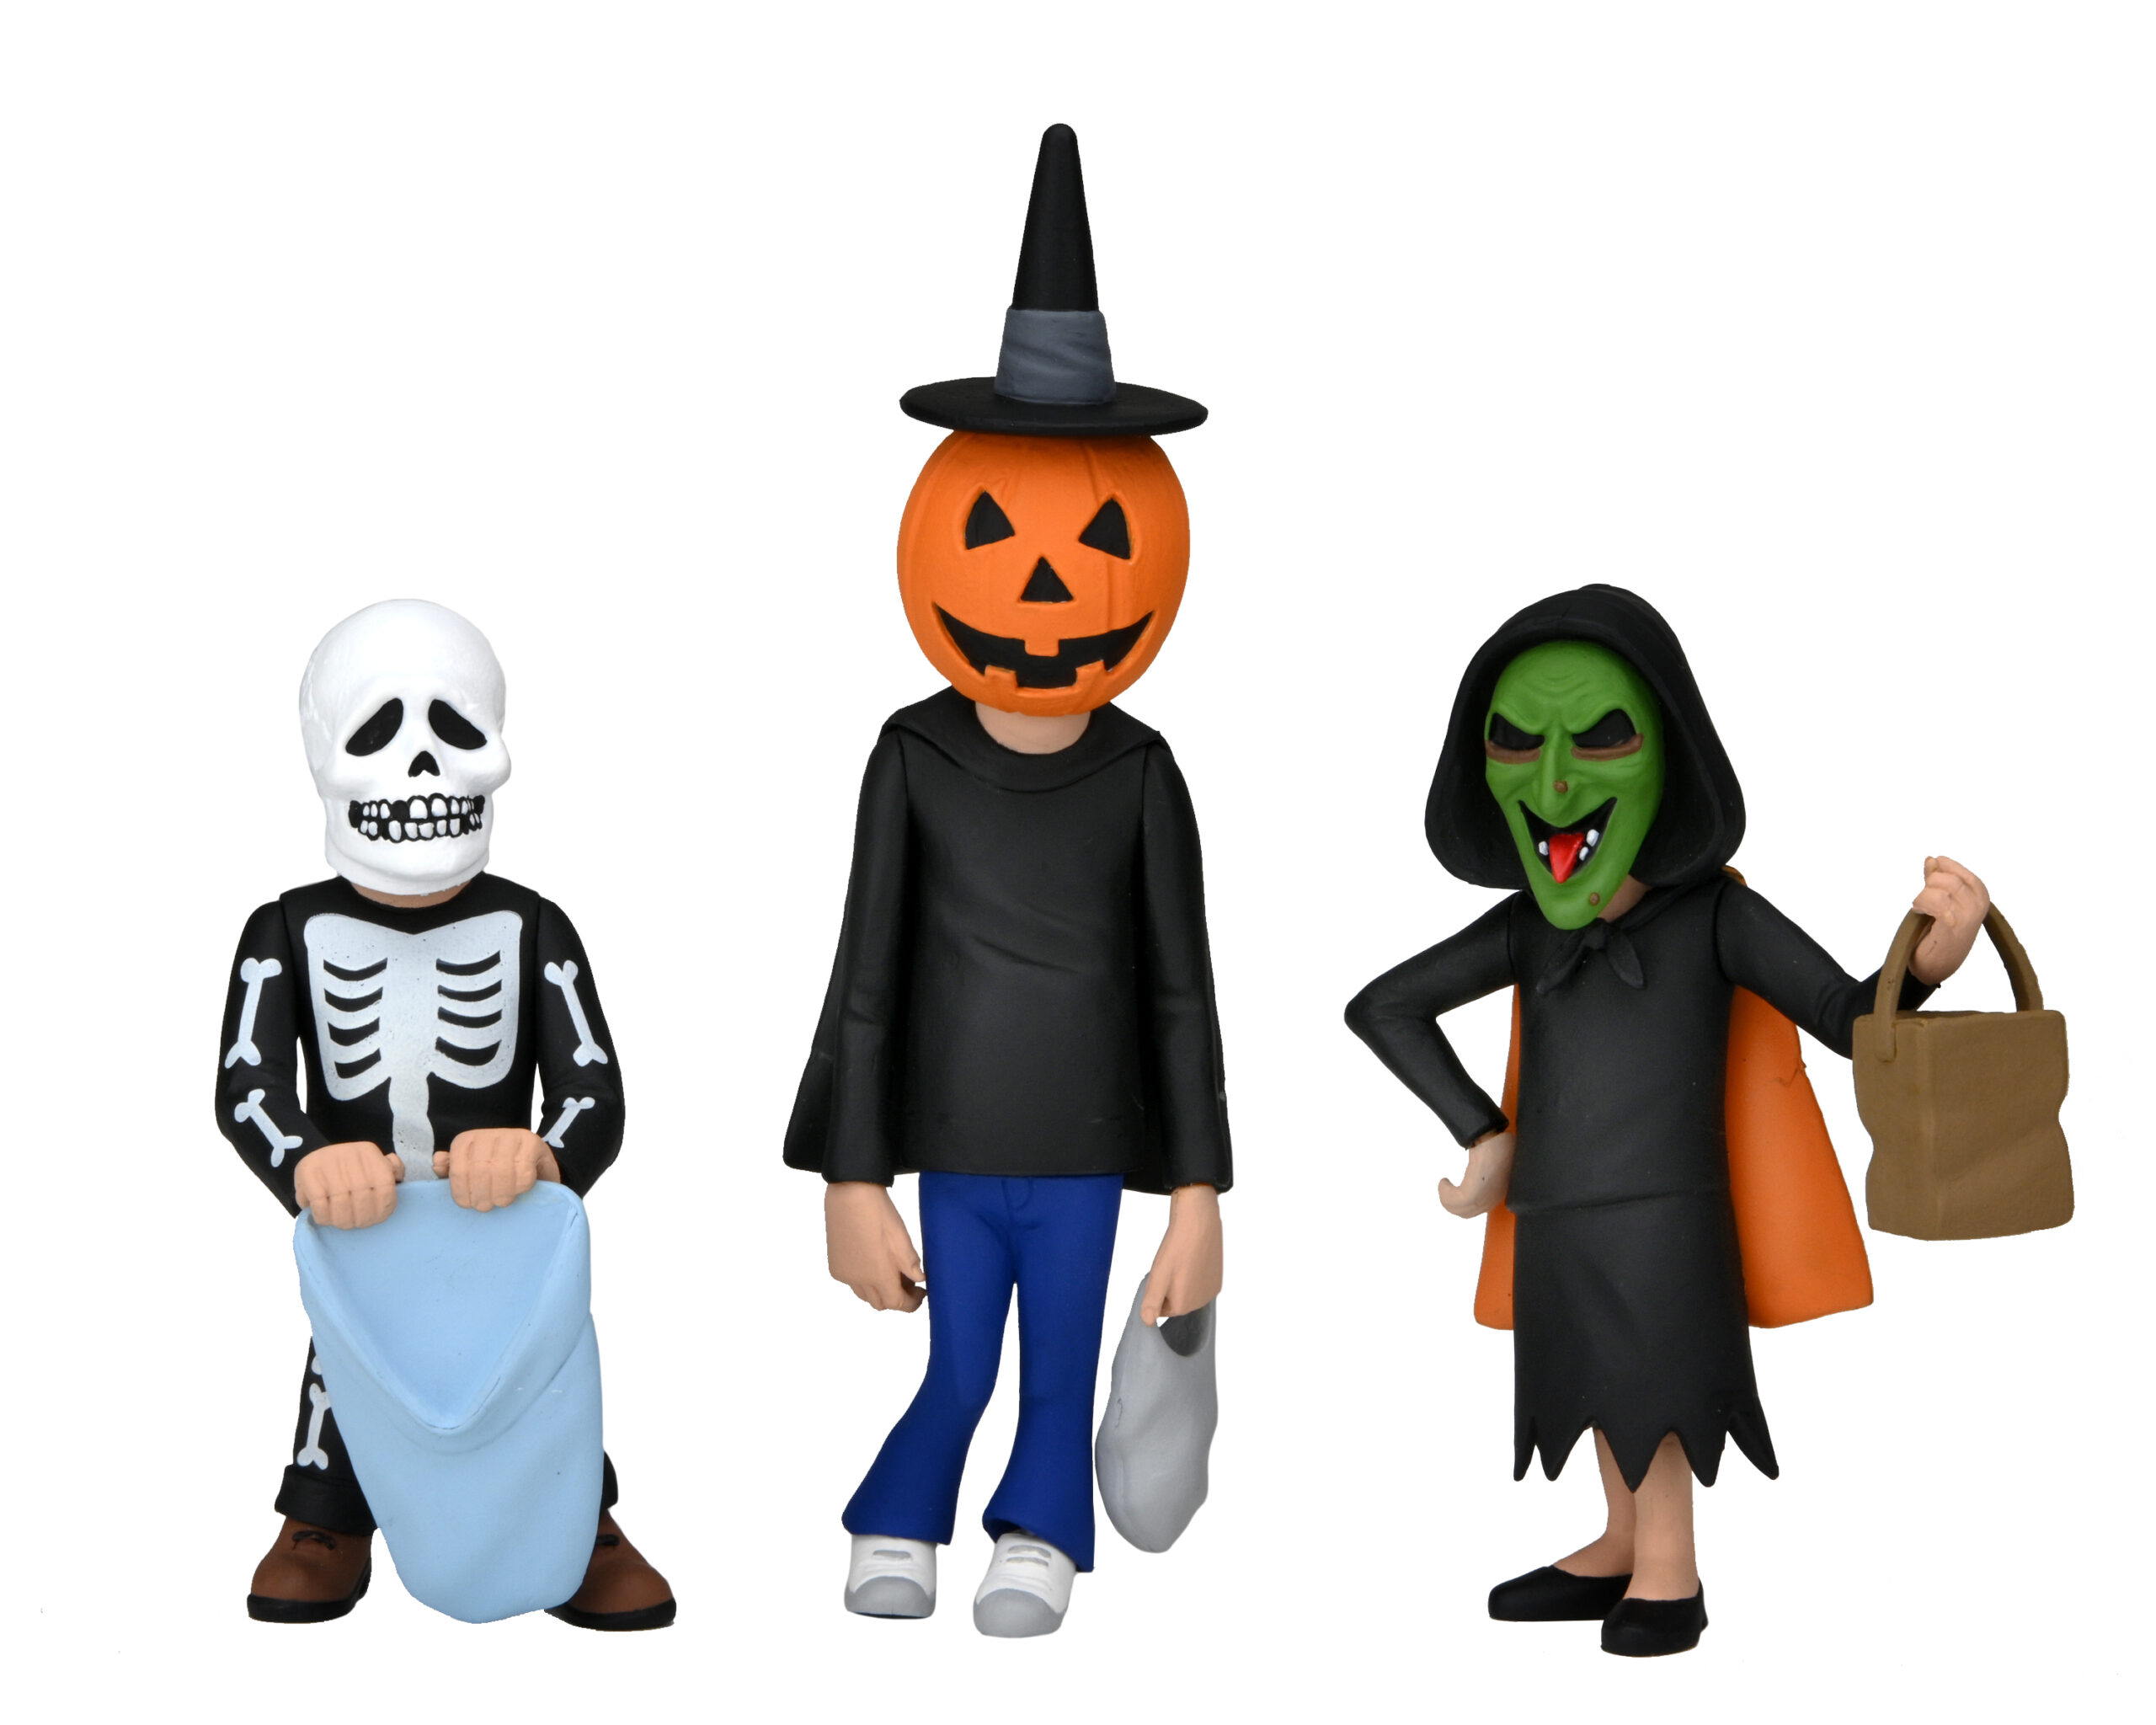 NECAOnline.com | Halloween 3 - 6" Scale Action Figures – Toony Terrors “Trick or Treaters” 3-pack